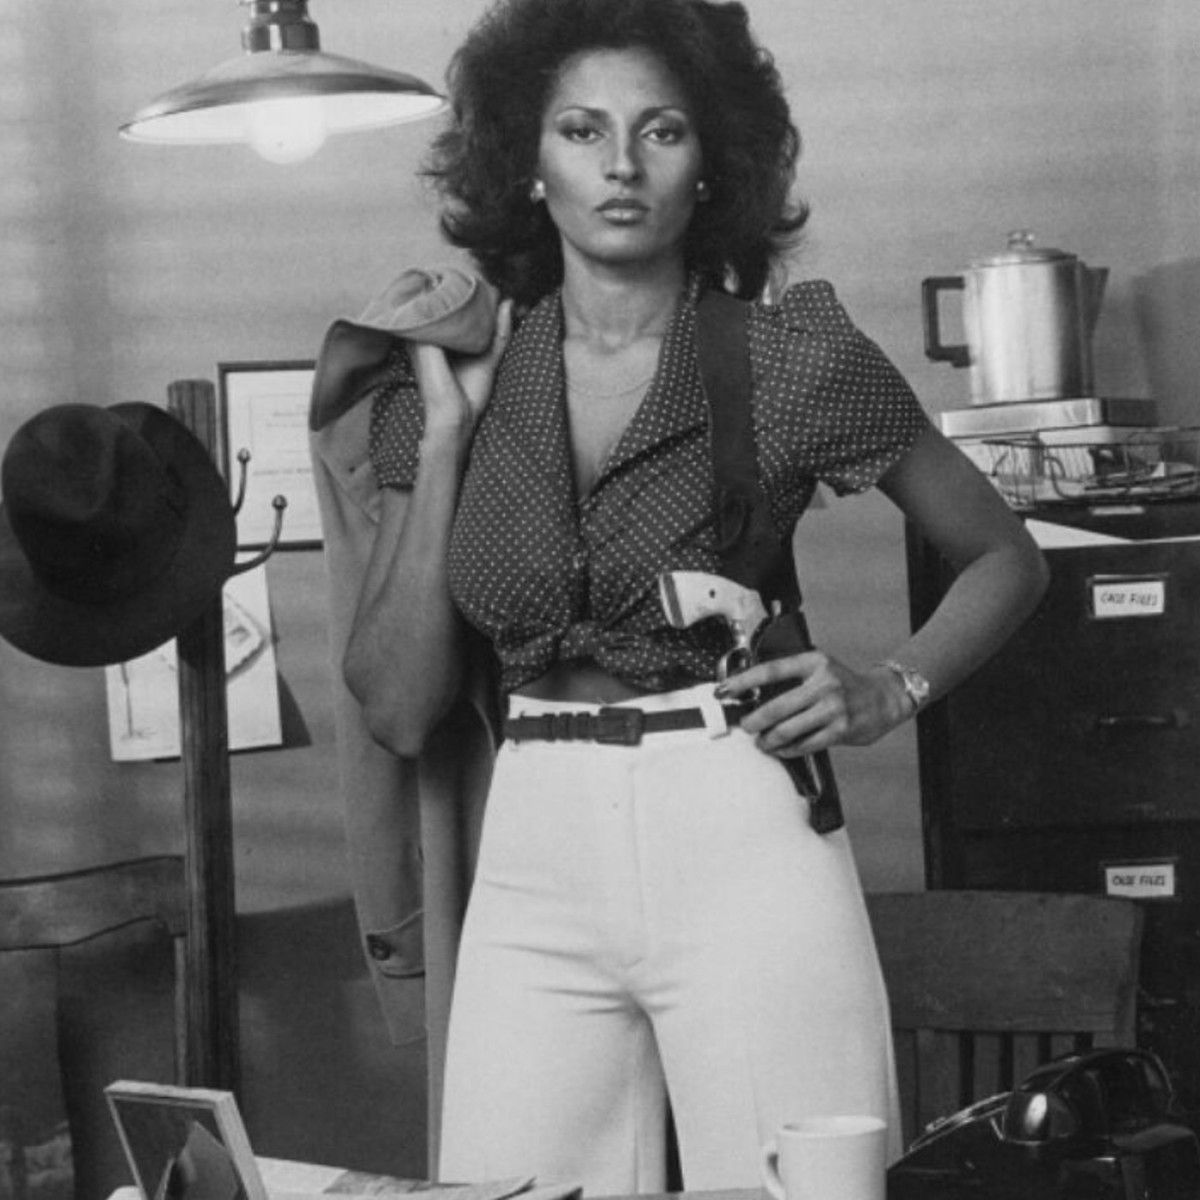 whatever-happened-to-pam-grier-the-original-foxy-brown-and-blaxploitation-film-queen